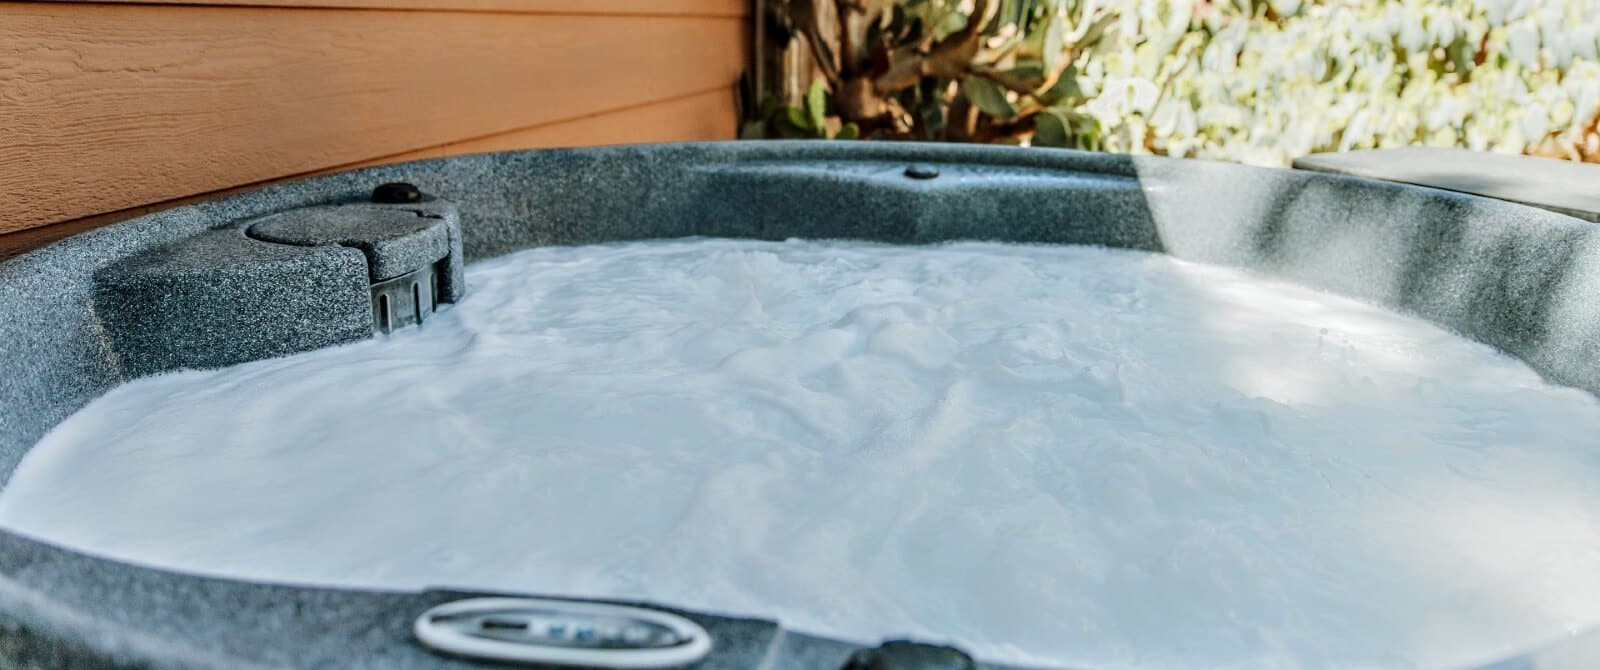 A round outdoor hot tub with bubbly water